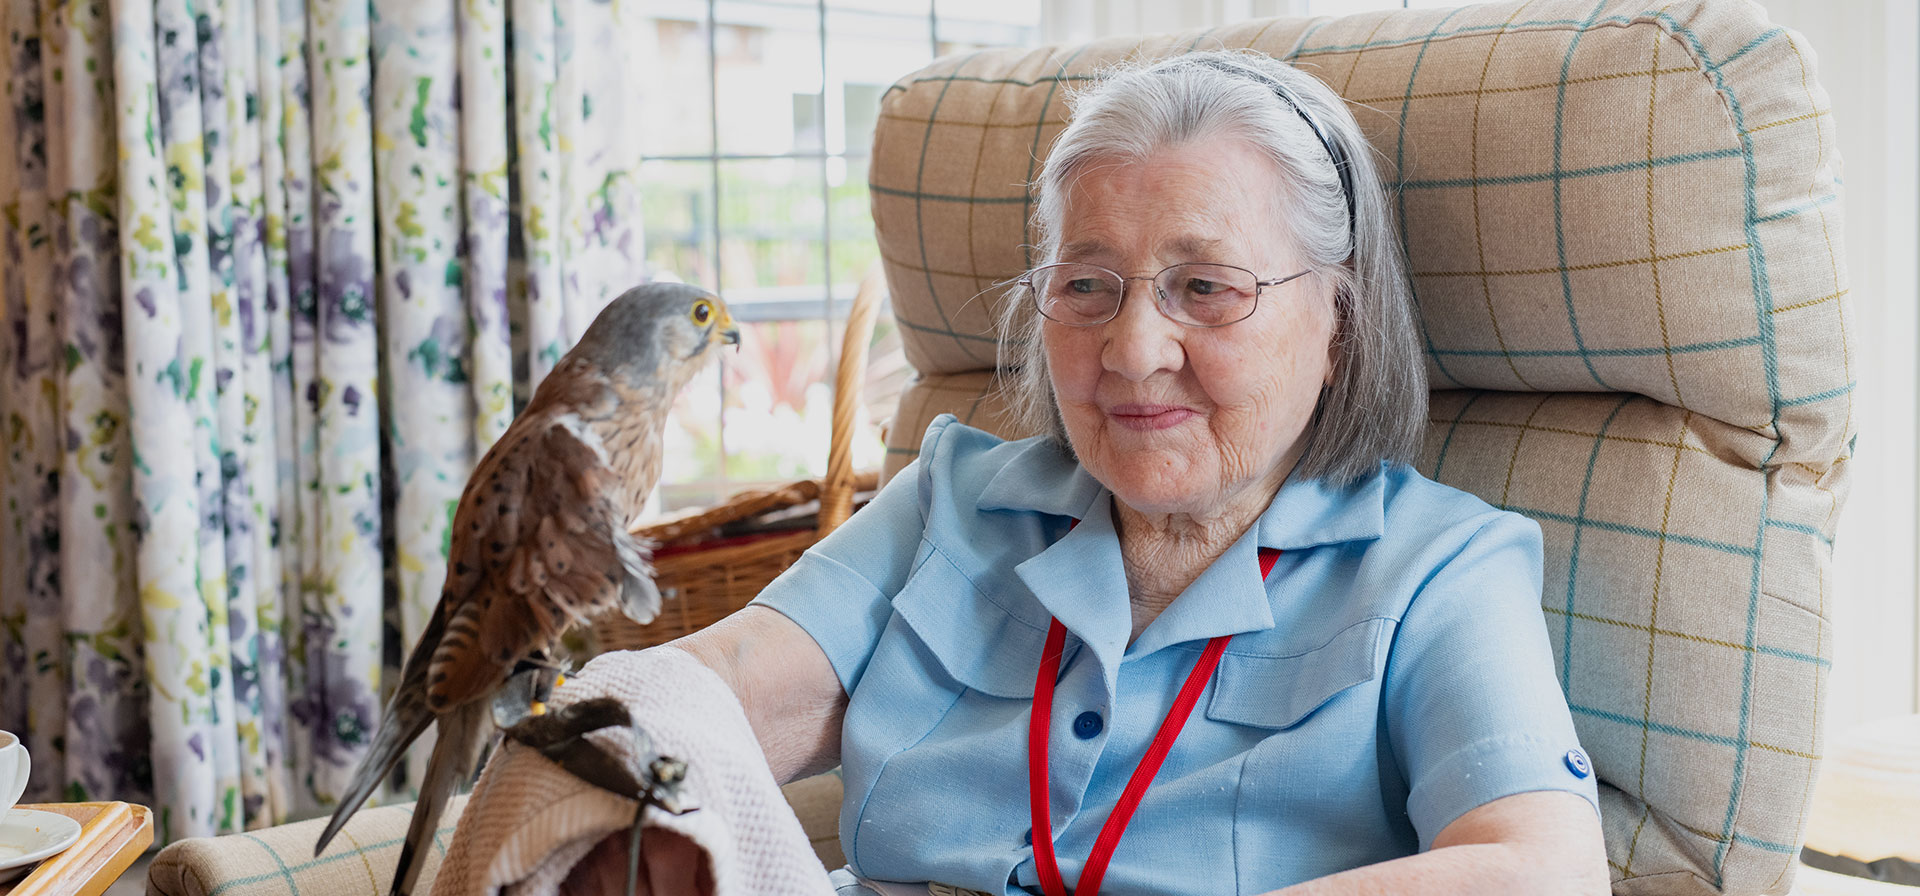 Residents at Swarthmore Care Home in Buckinghamshire